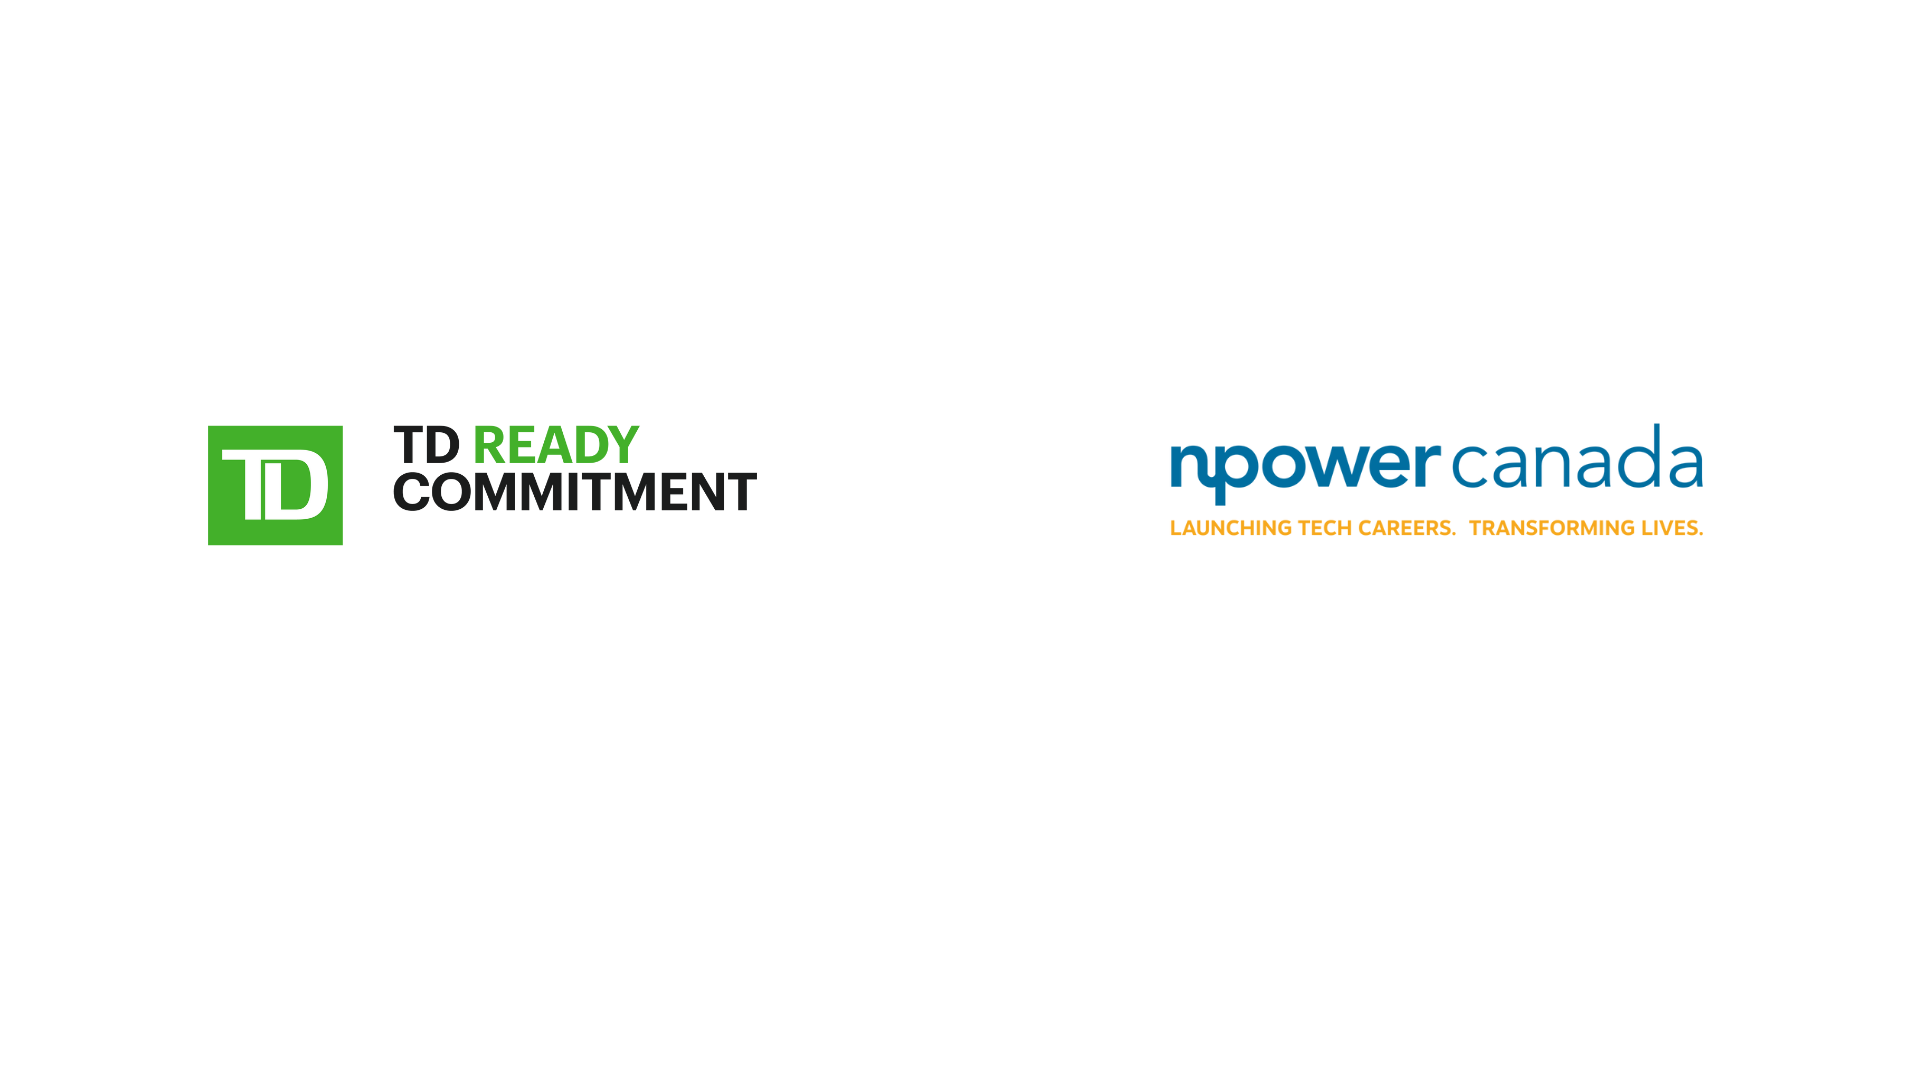 TD logo in white with green background and TD Ready Commitment in green and black font text, and NPower Canada logo in blue font text with English tagline in orange font text